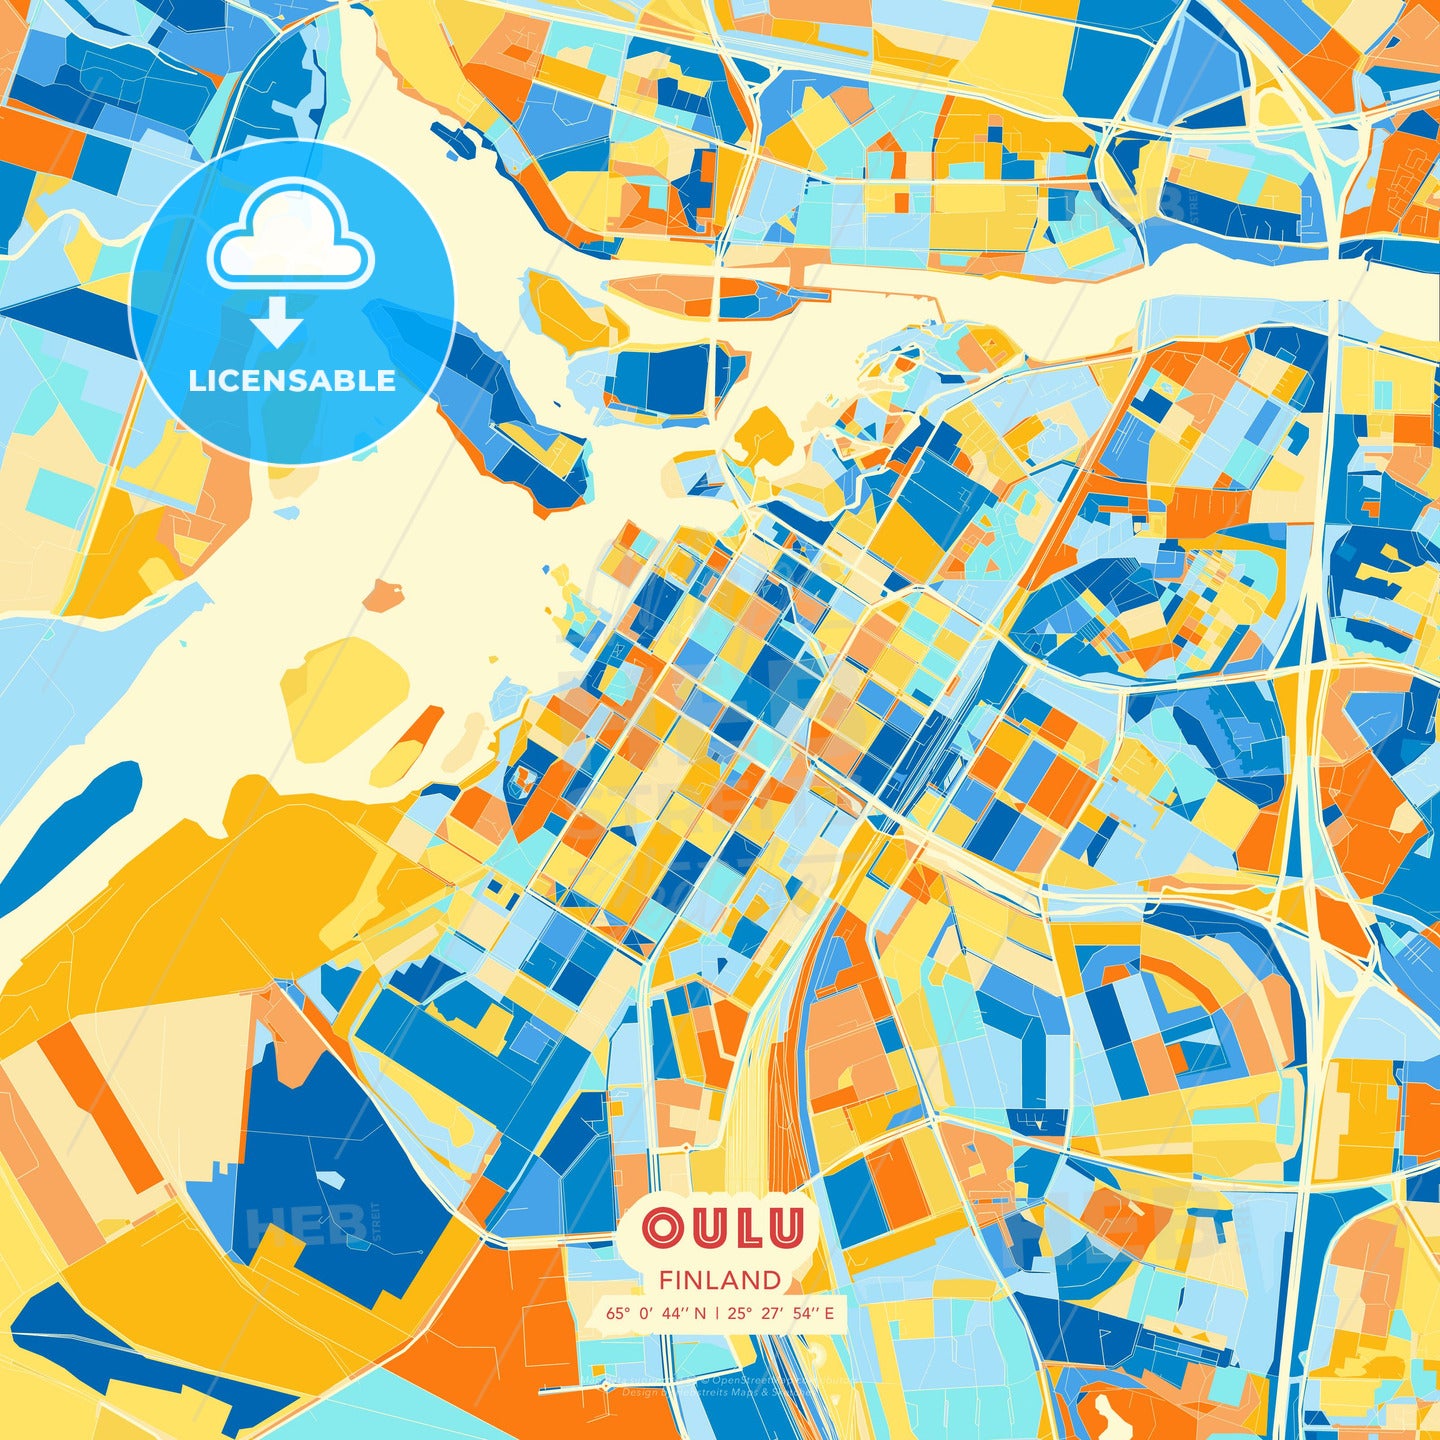 Oulu, Finland, map - HEBSTREITS Sketches